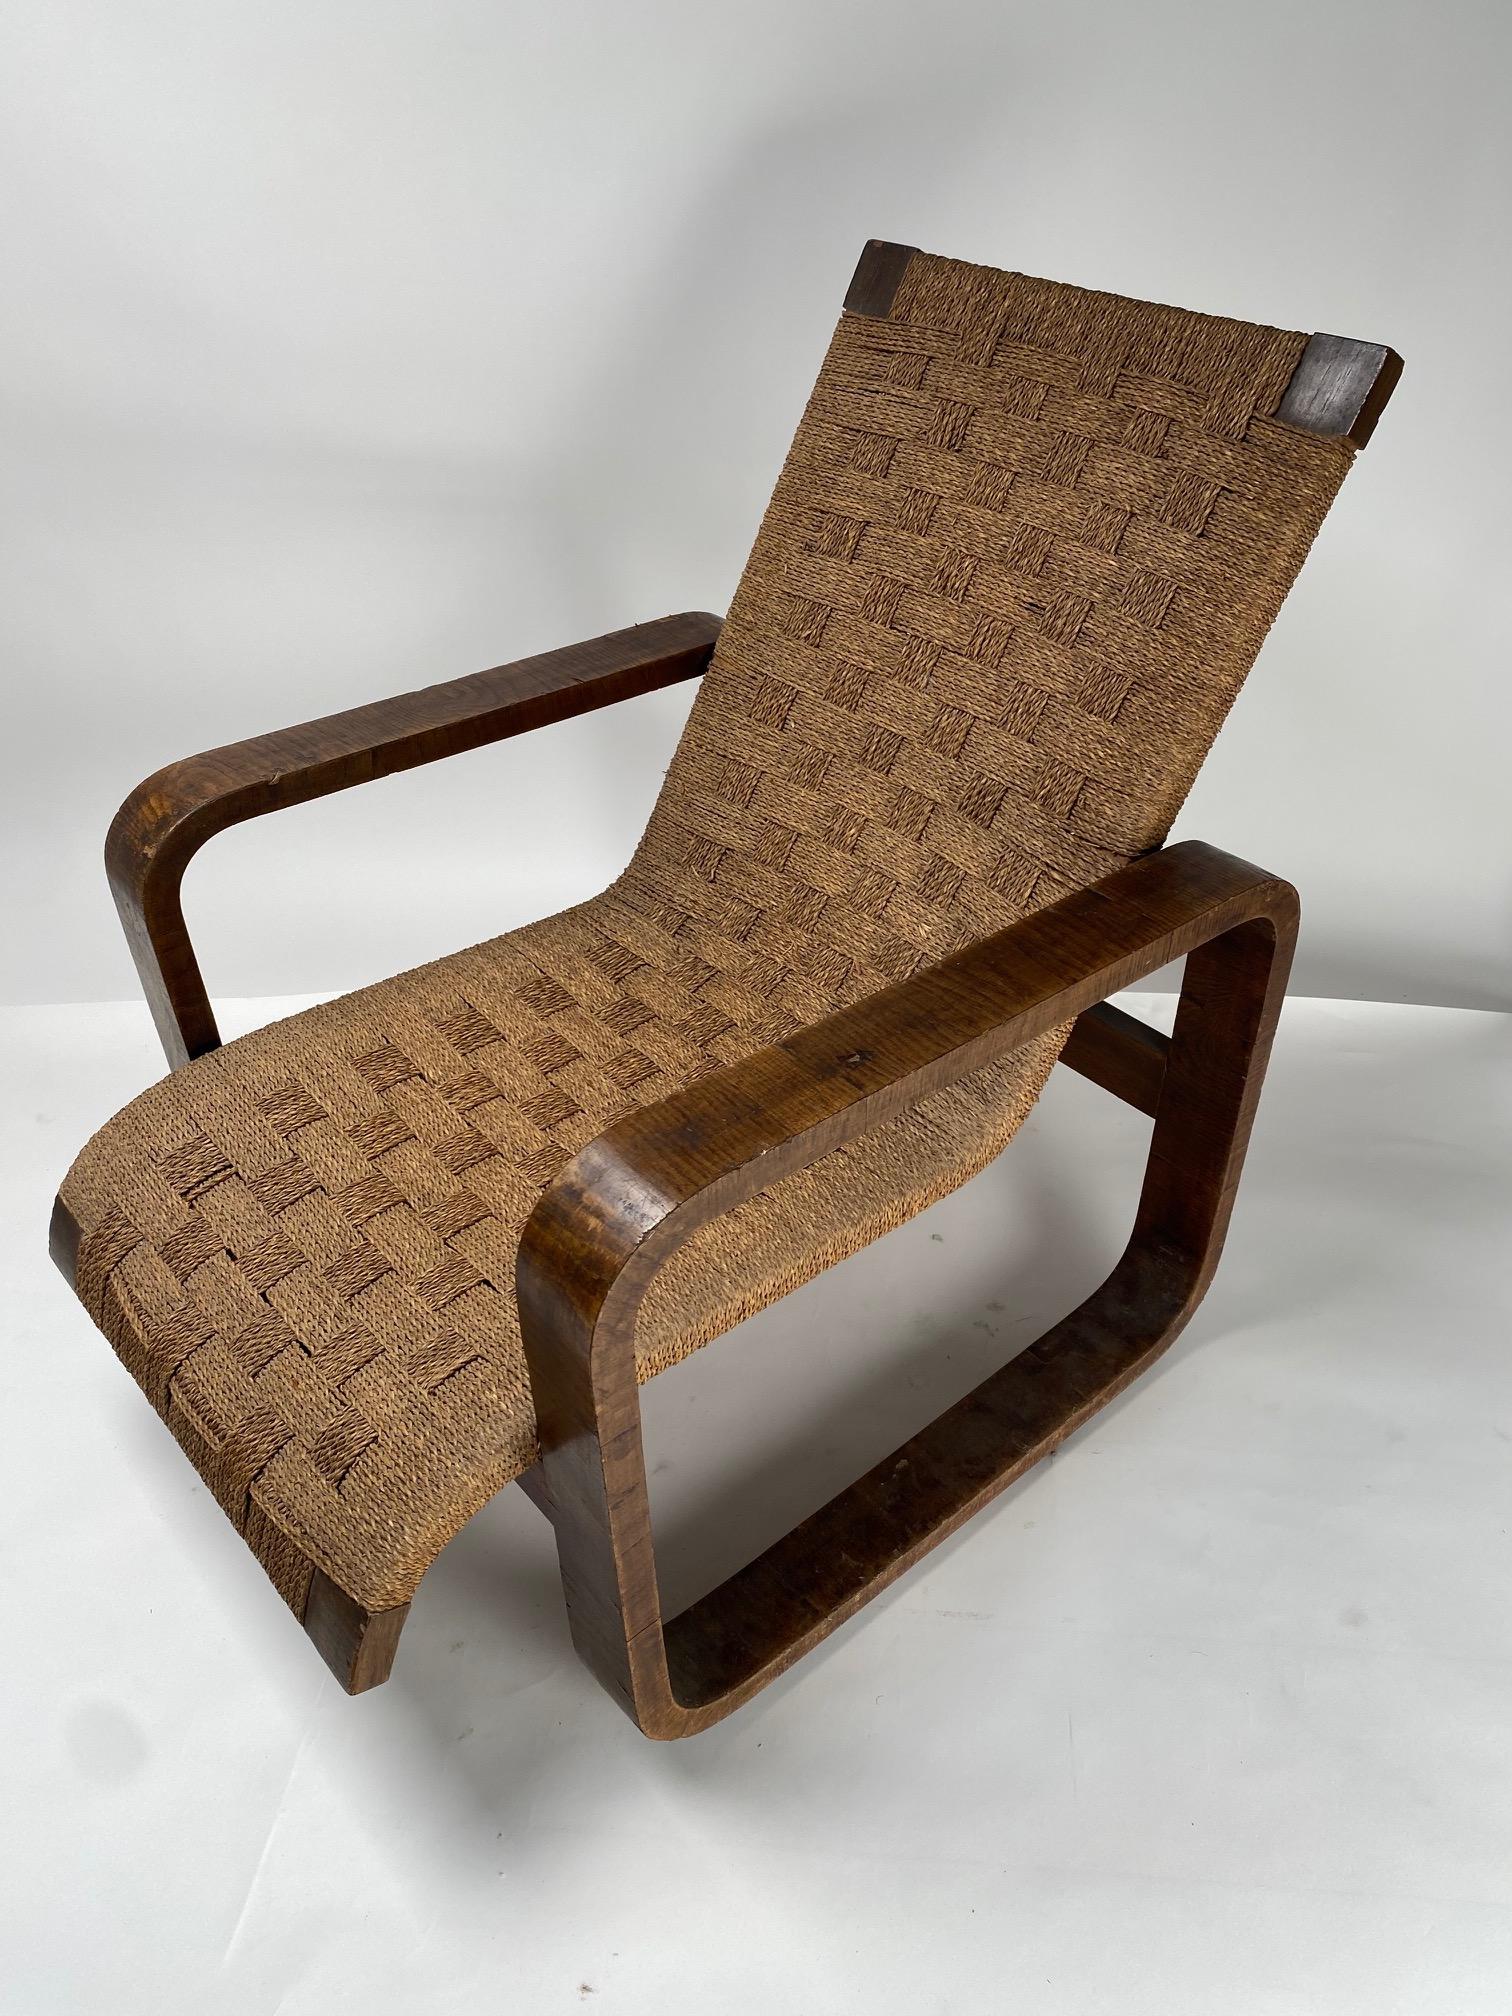 Sculptural Armchair in wood and rope, Giuseppe Pagano (Attr), Italy, 1940s For Sale 1